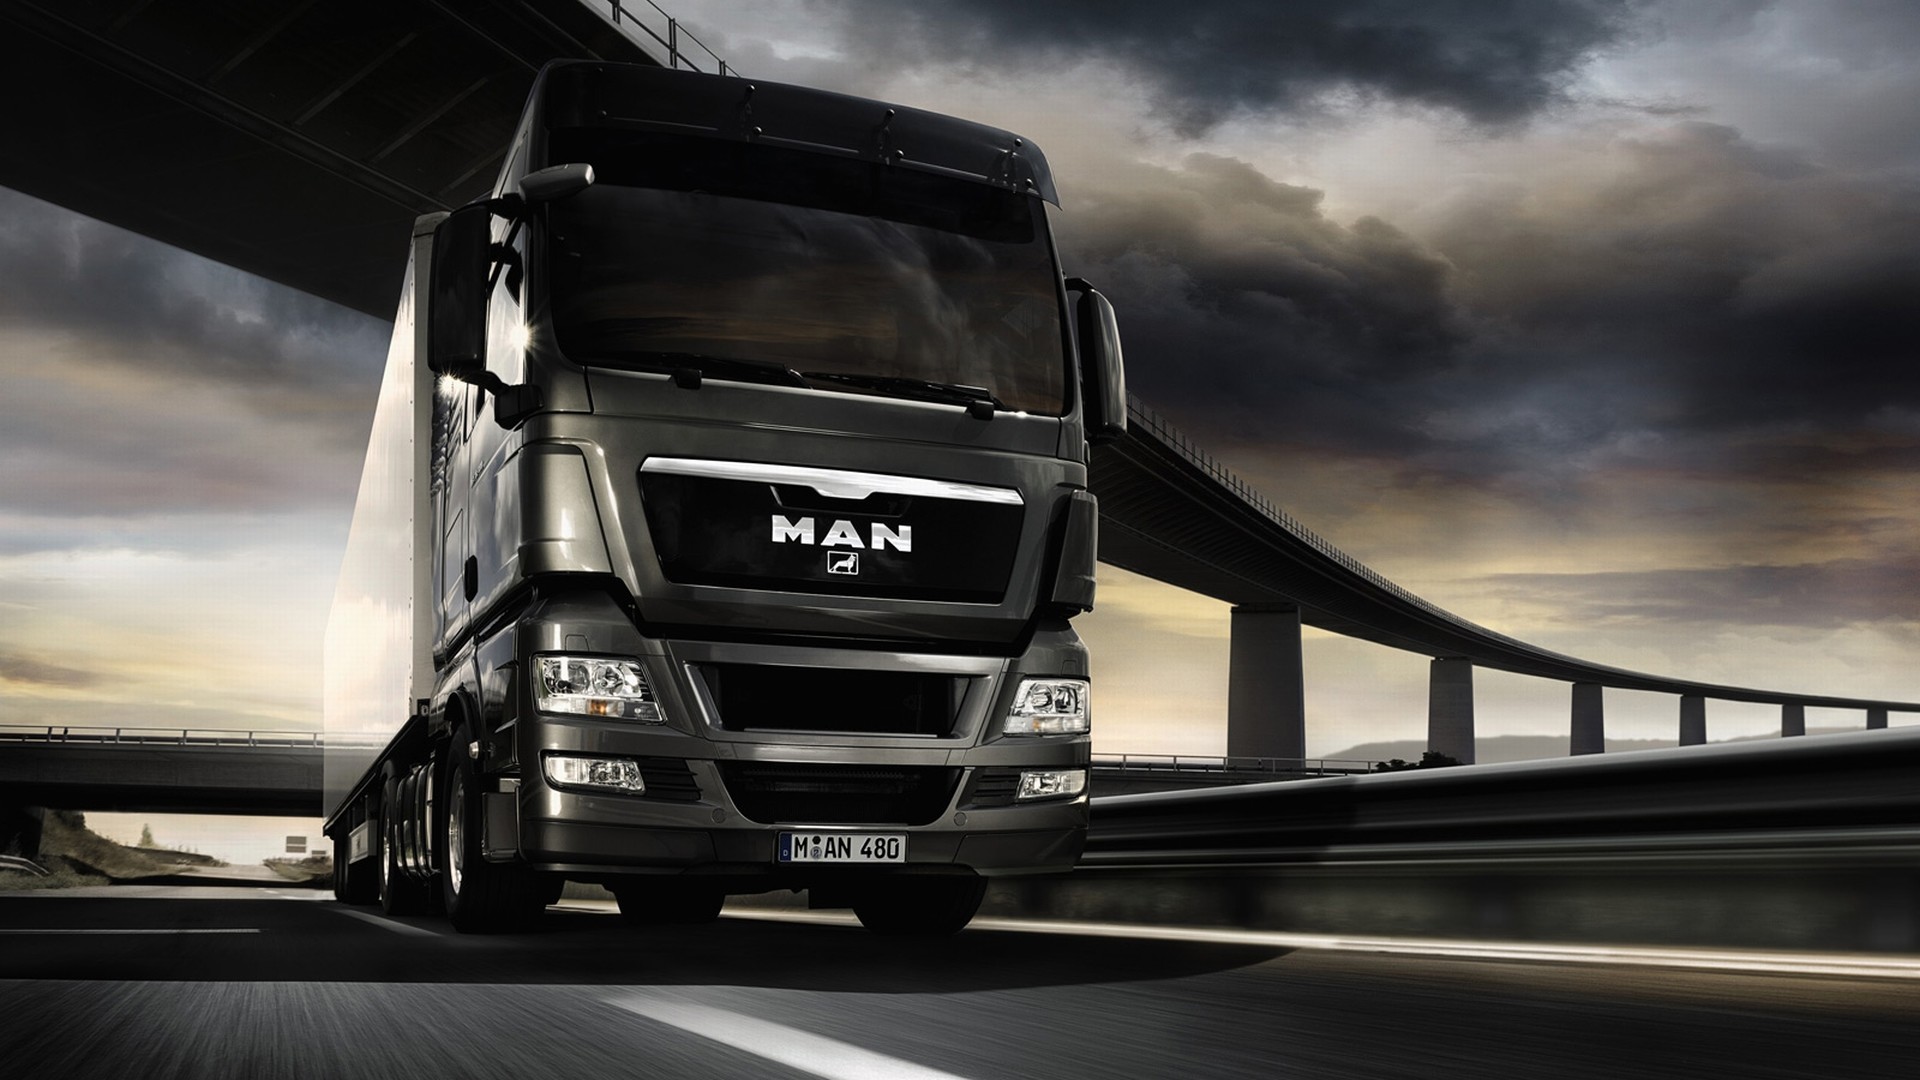 1920x1080 Volvo Truck Photos, Download Volvo Truck Wallpapers, Download Free  1920Ã1080 Truck Wallpapers